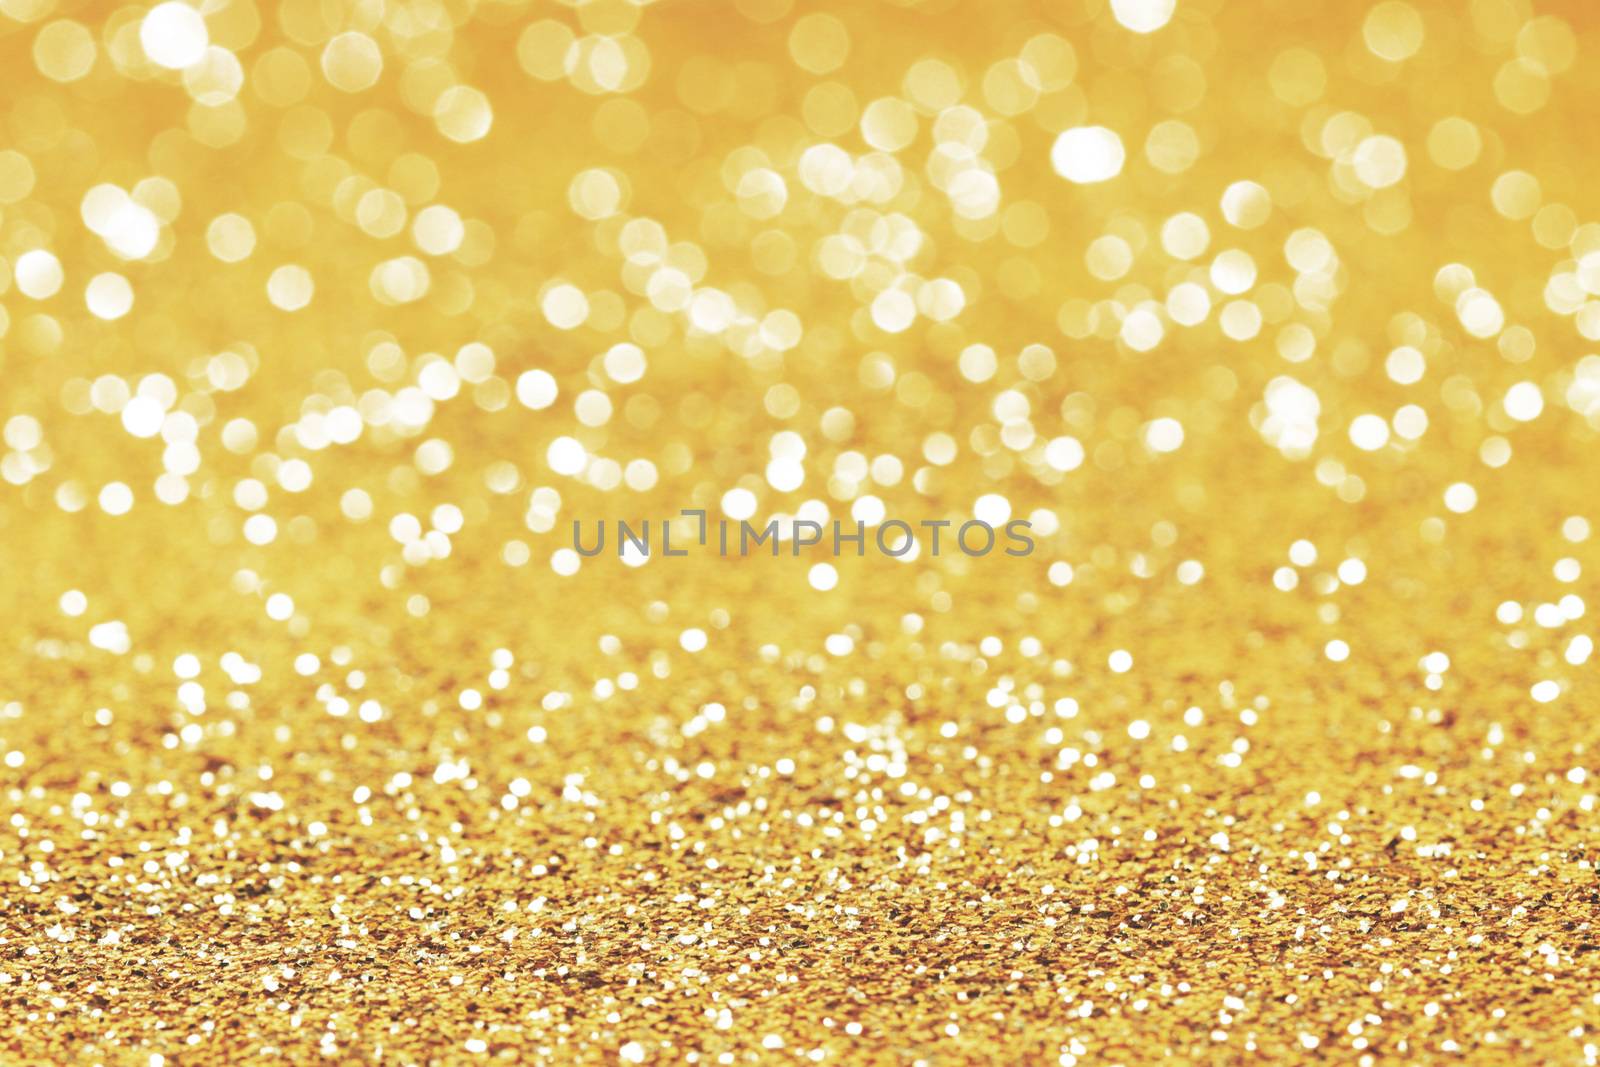 Abstract glitter bokeh holiday golden background